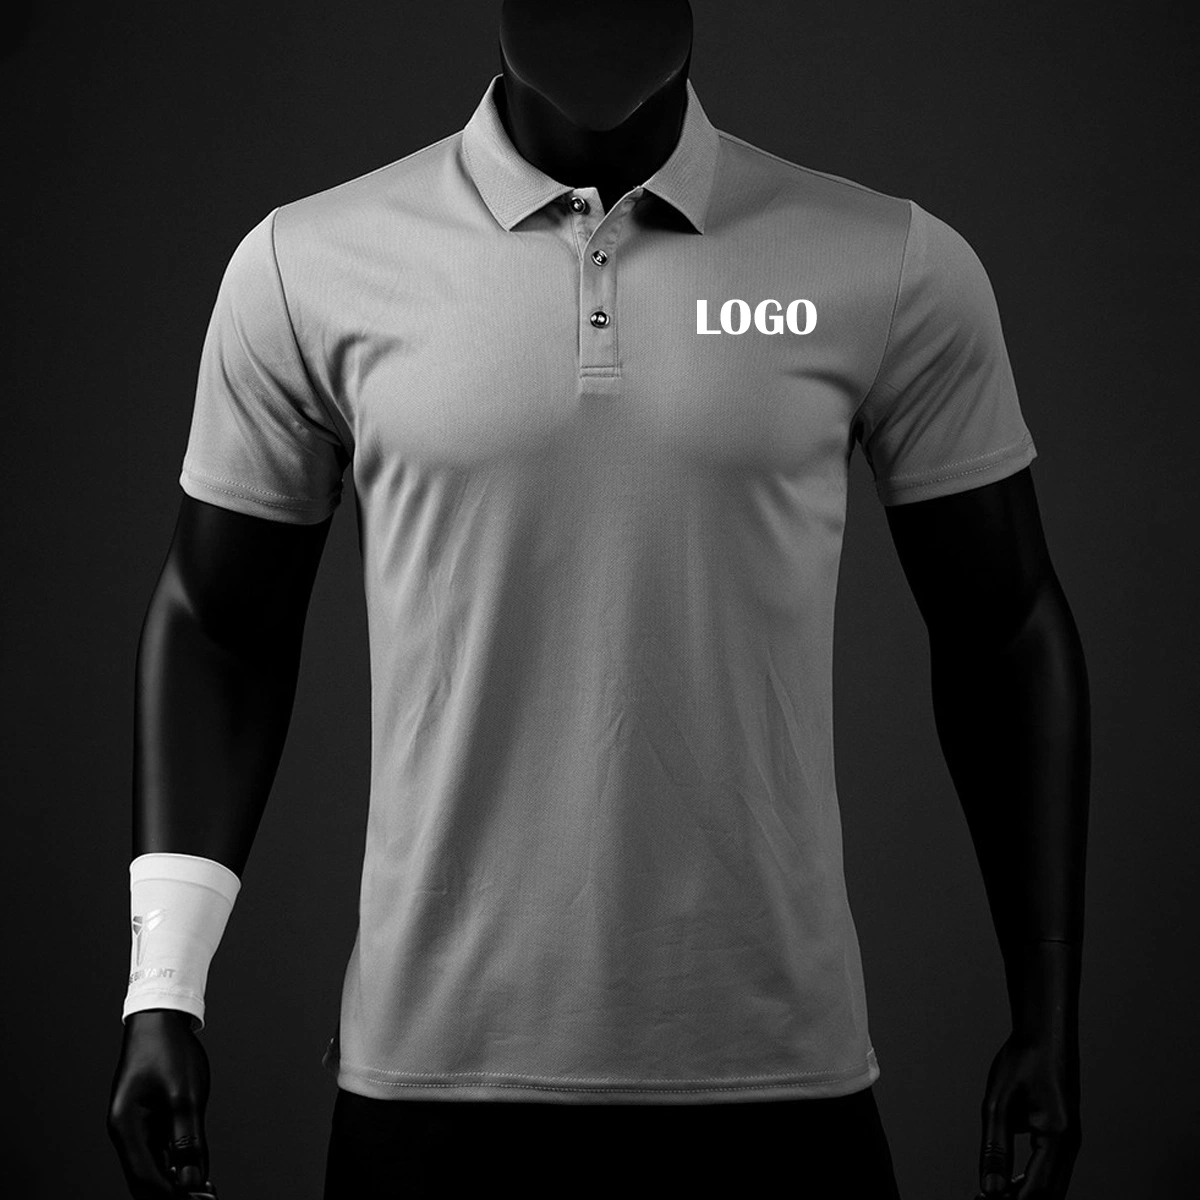 160g 100% Polyester Quick Dry Plain Custom Sublimation Slim Fit Mens Tshirt Polo Blank Embroidery Printing Customized Boss Dry Fit Golf Polo T Shirt for Men